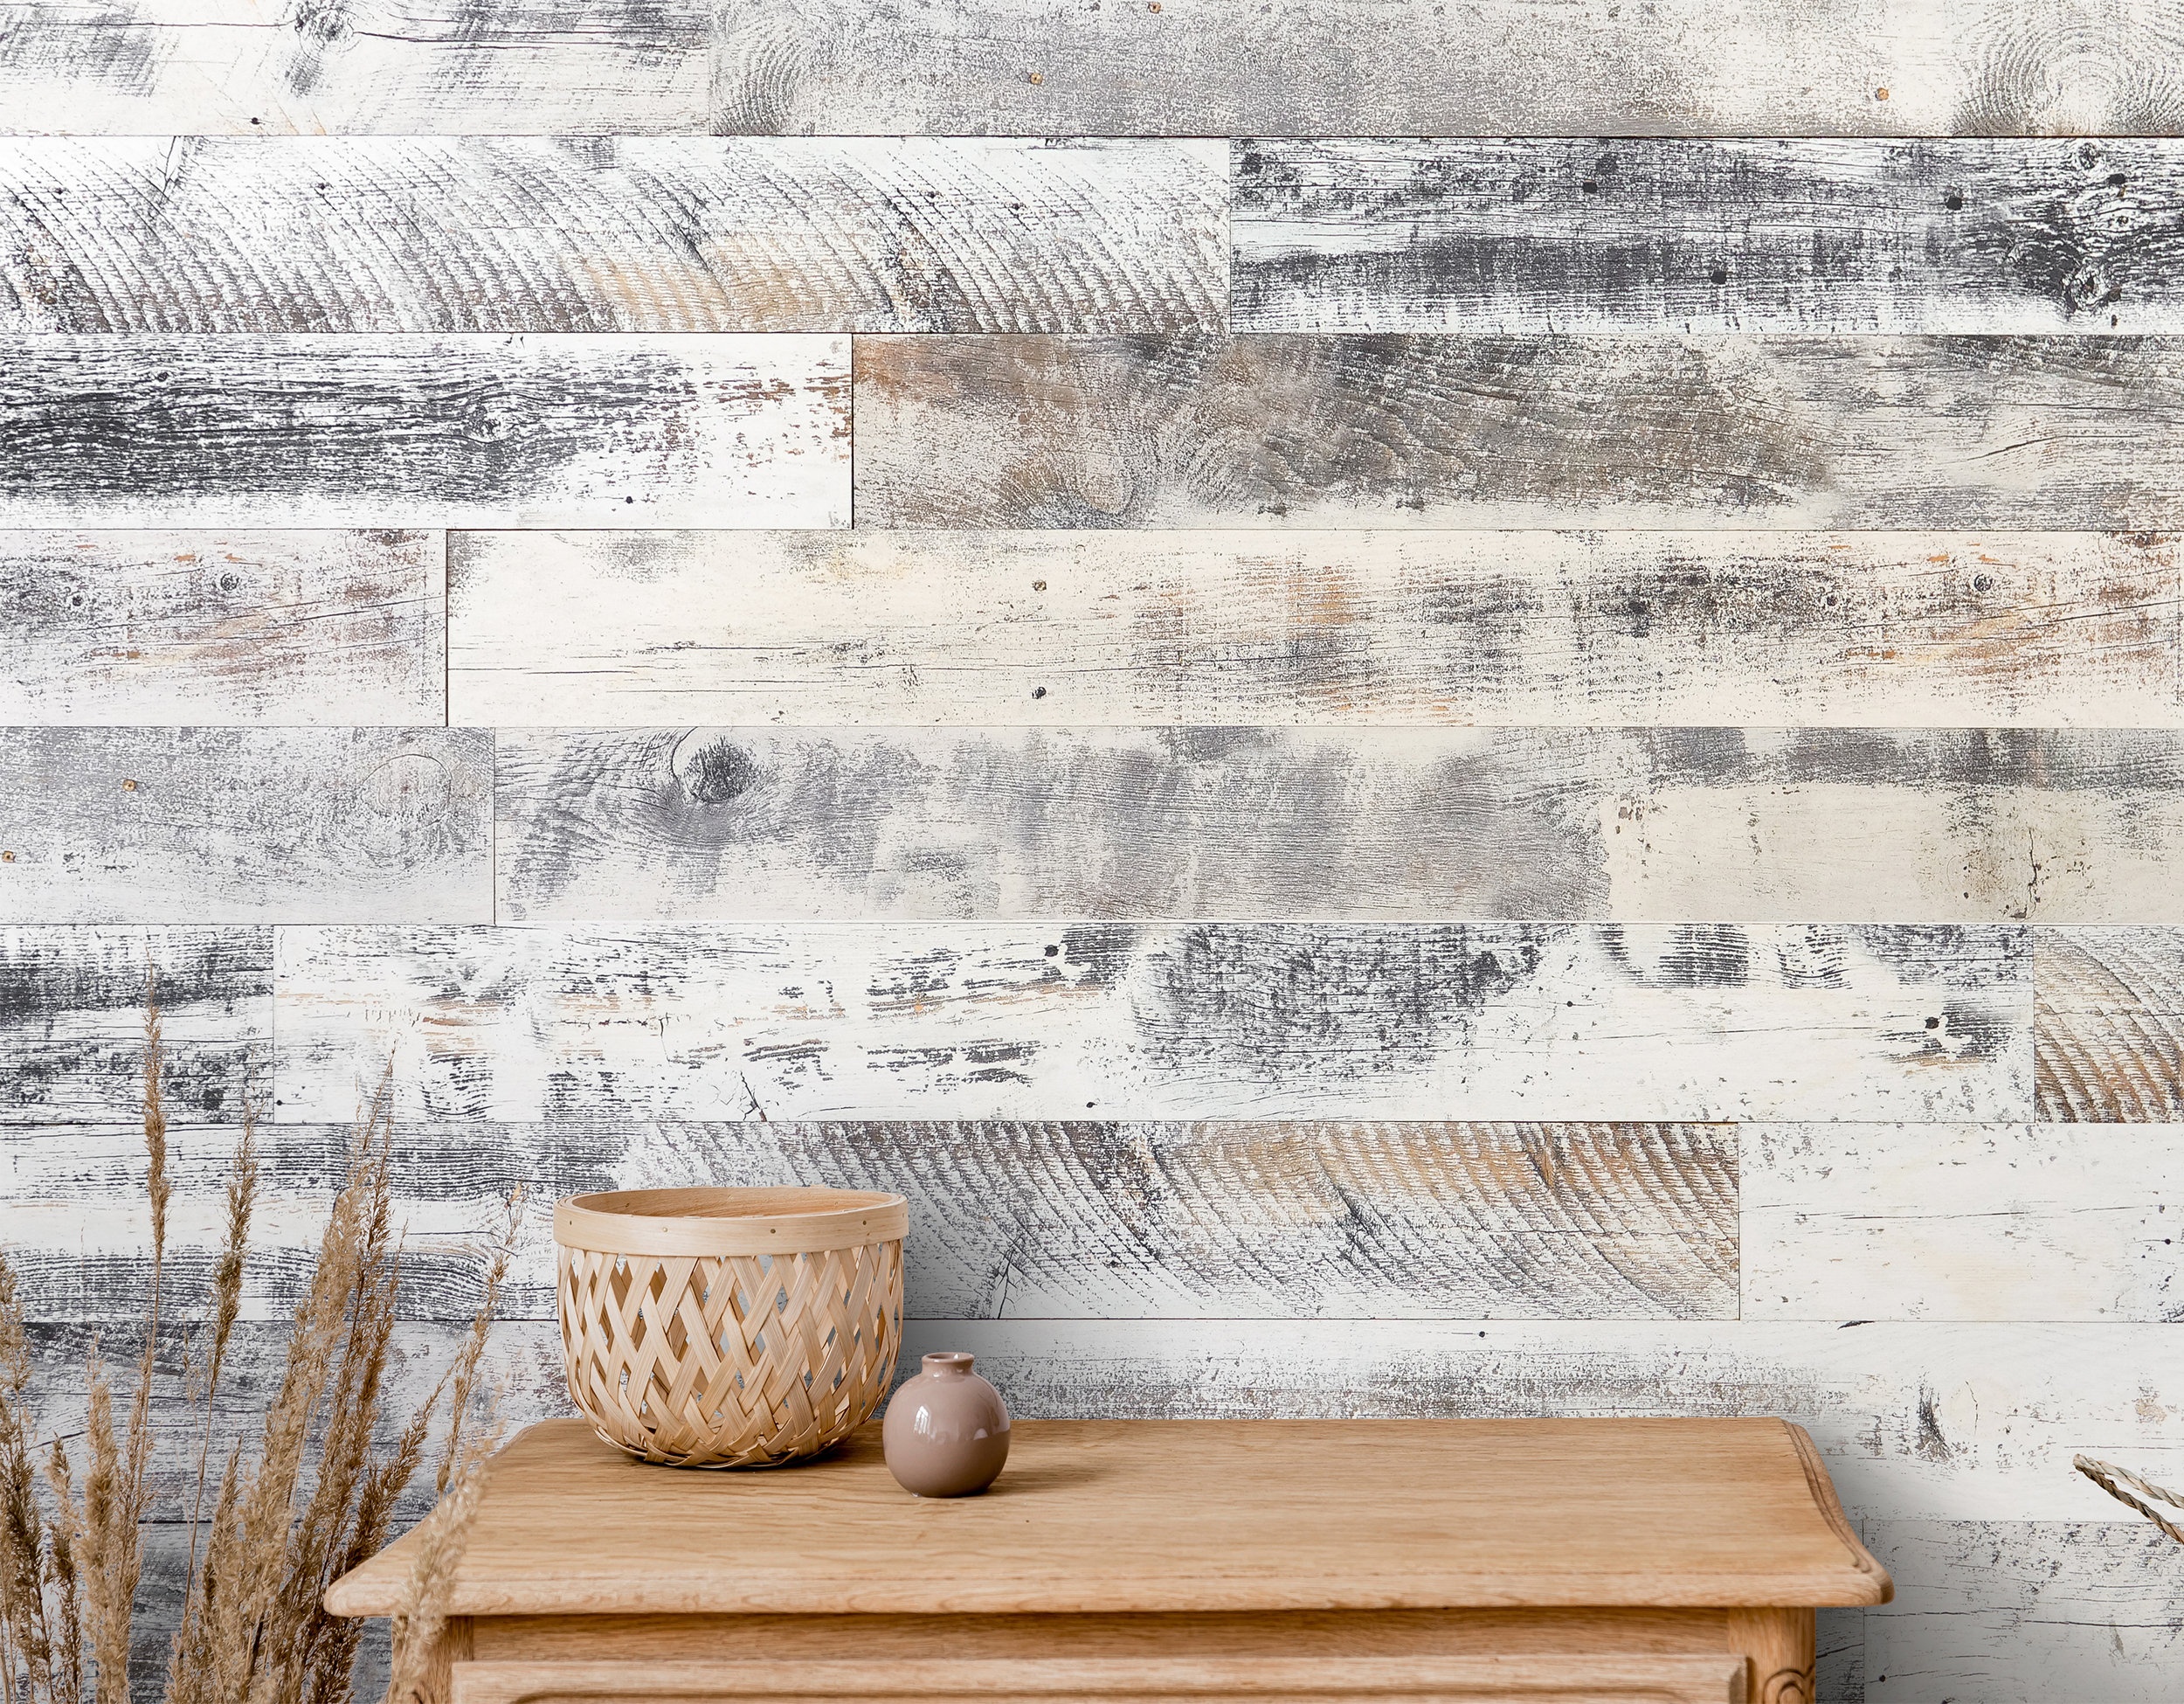 Tempaper Onyx Beadboard Vinyl Peel and Stick Removable Wallpaper 28 sq  ft BD15051  The Home Depot